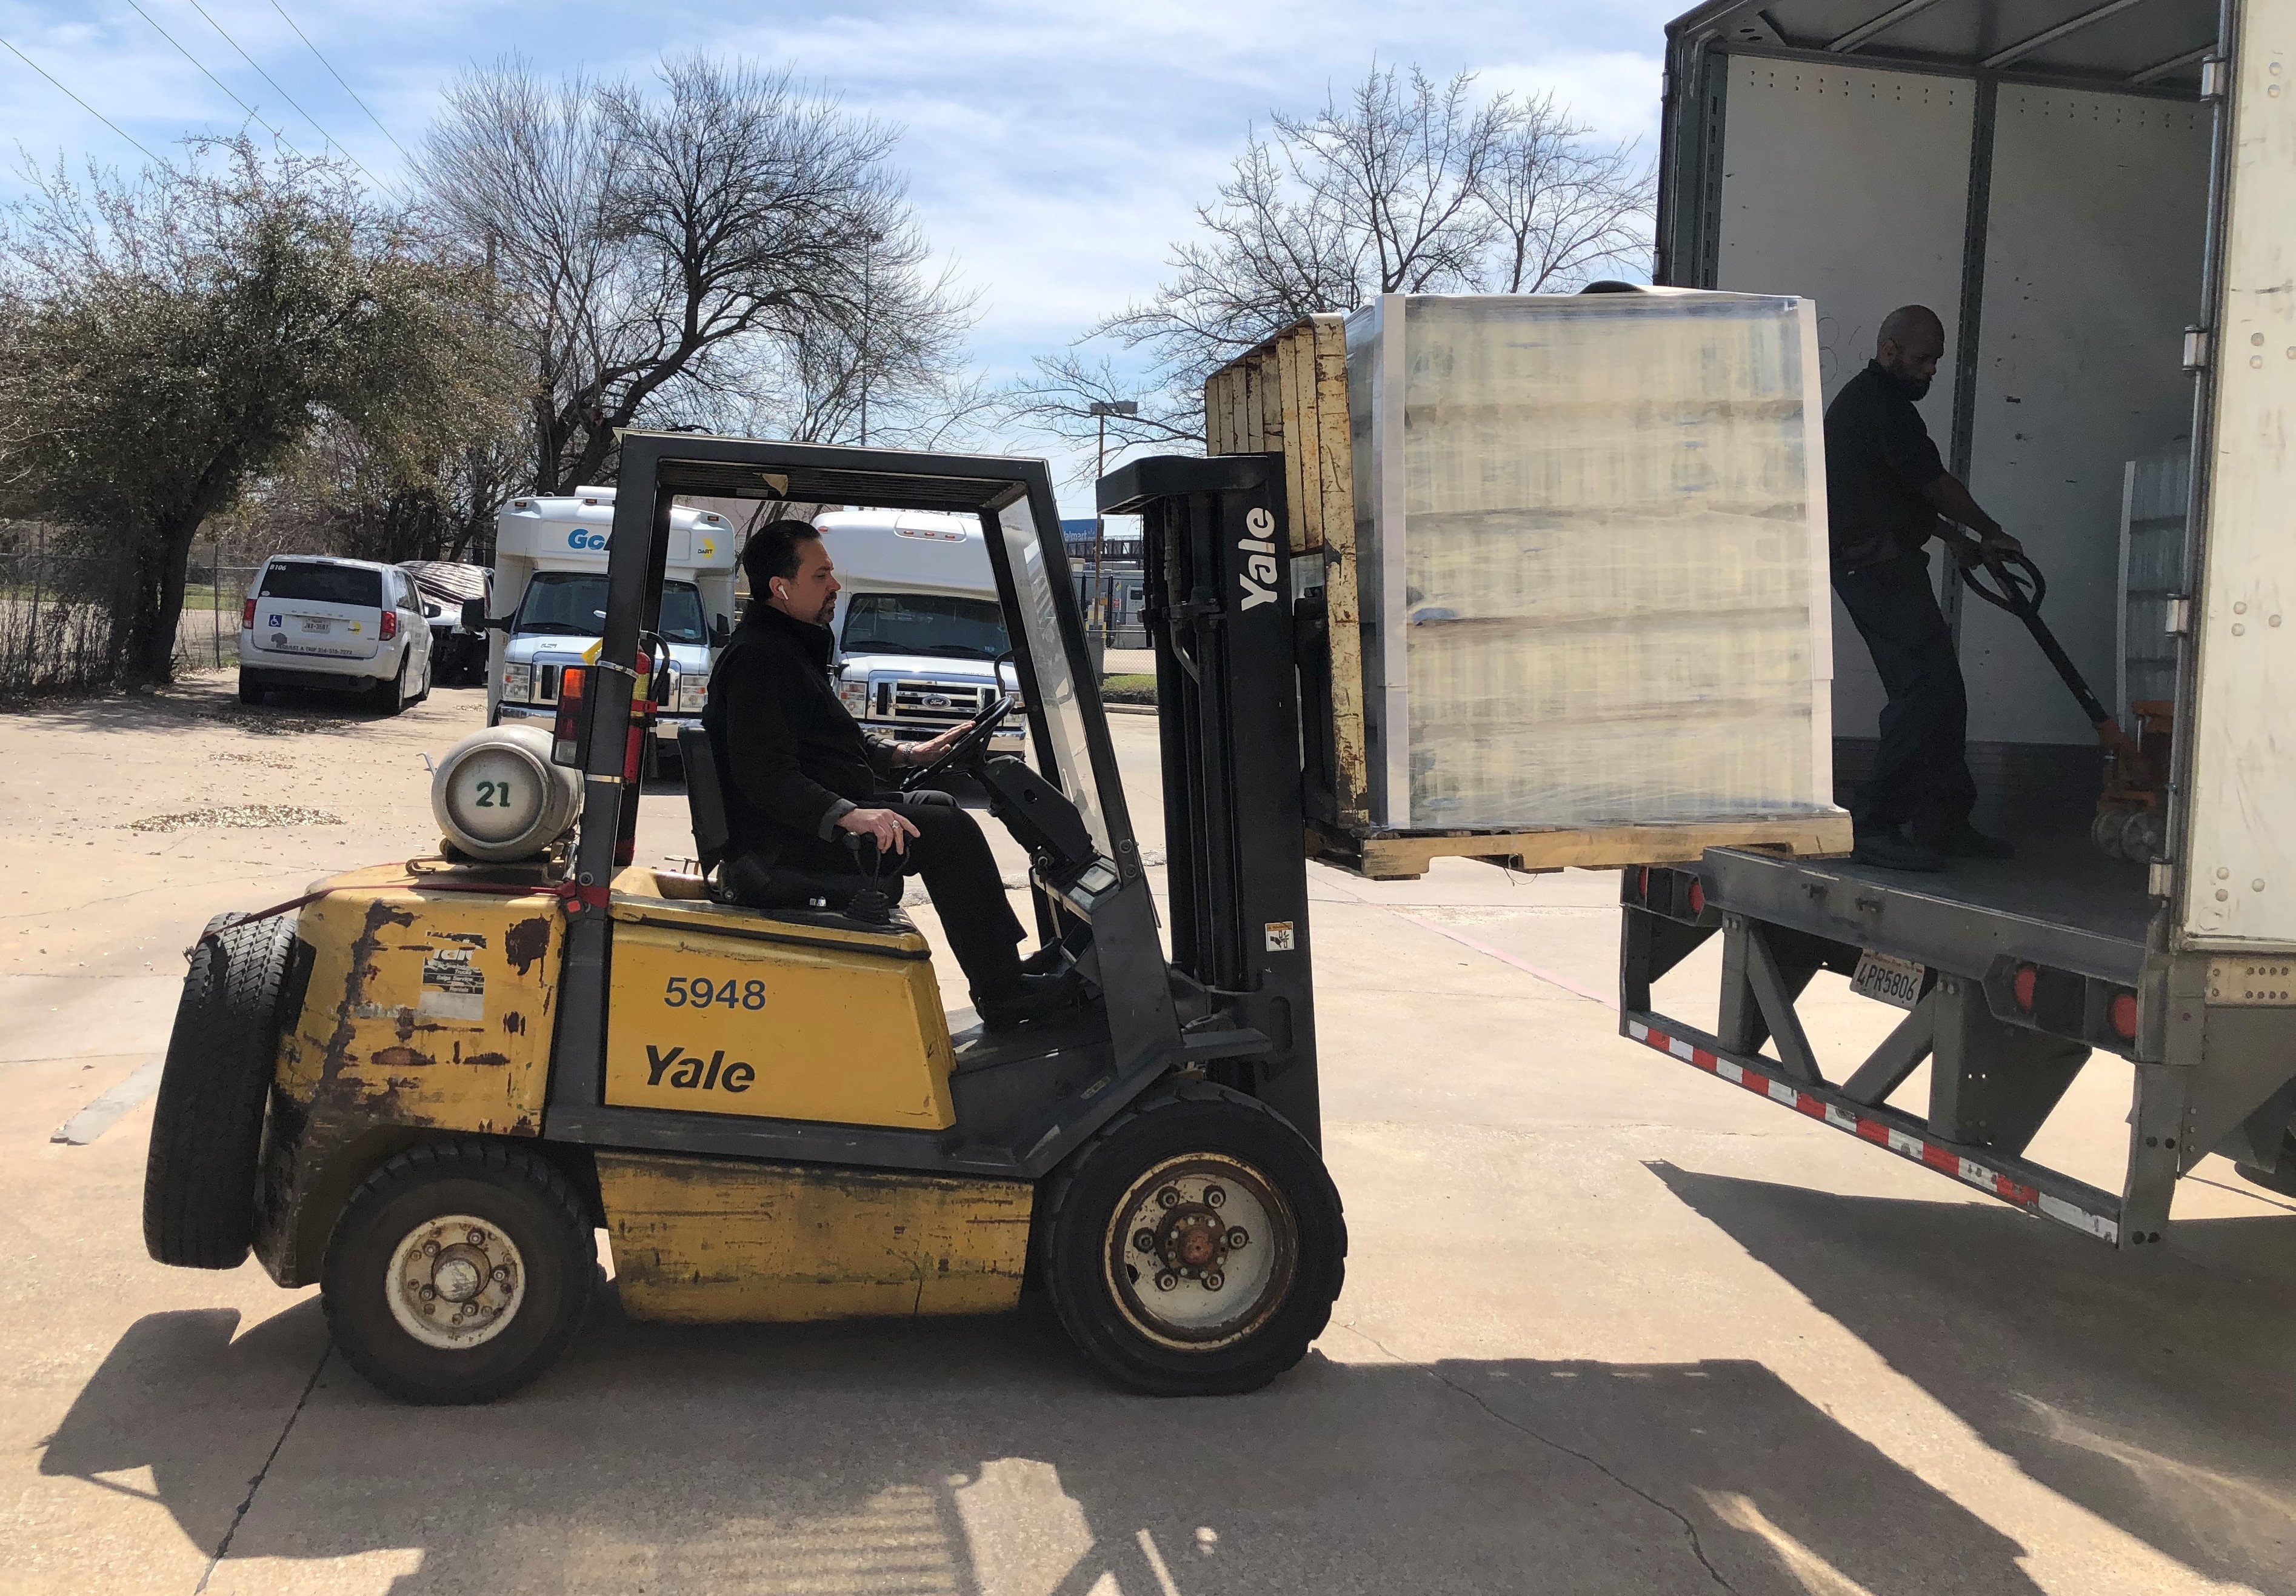 MV Transportation bottled water donation for Texas storm relief